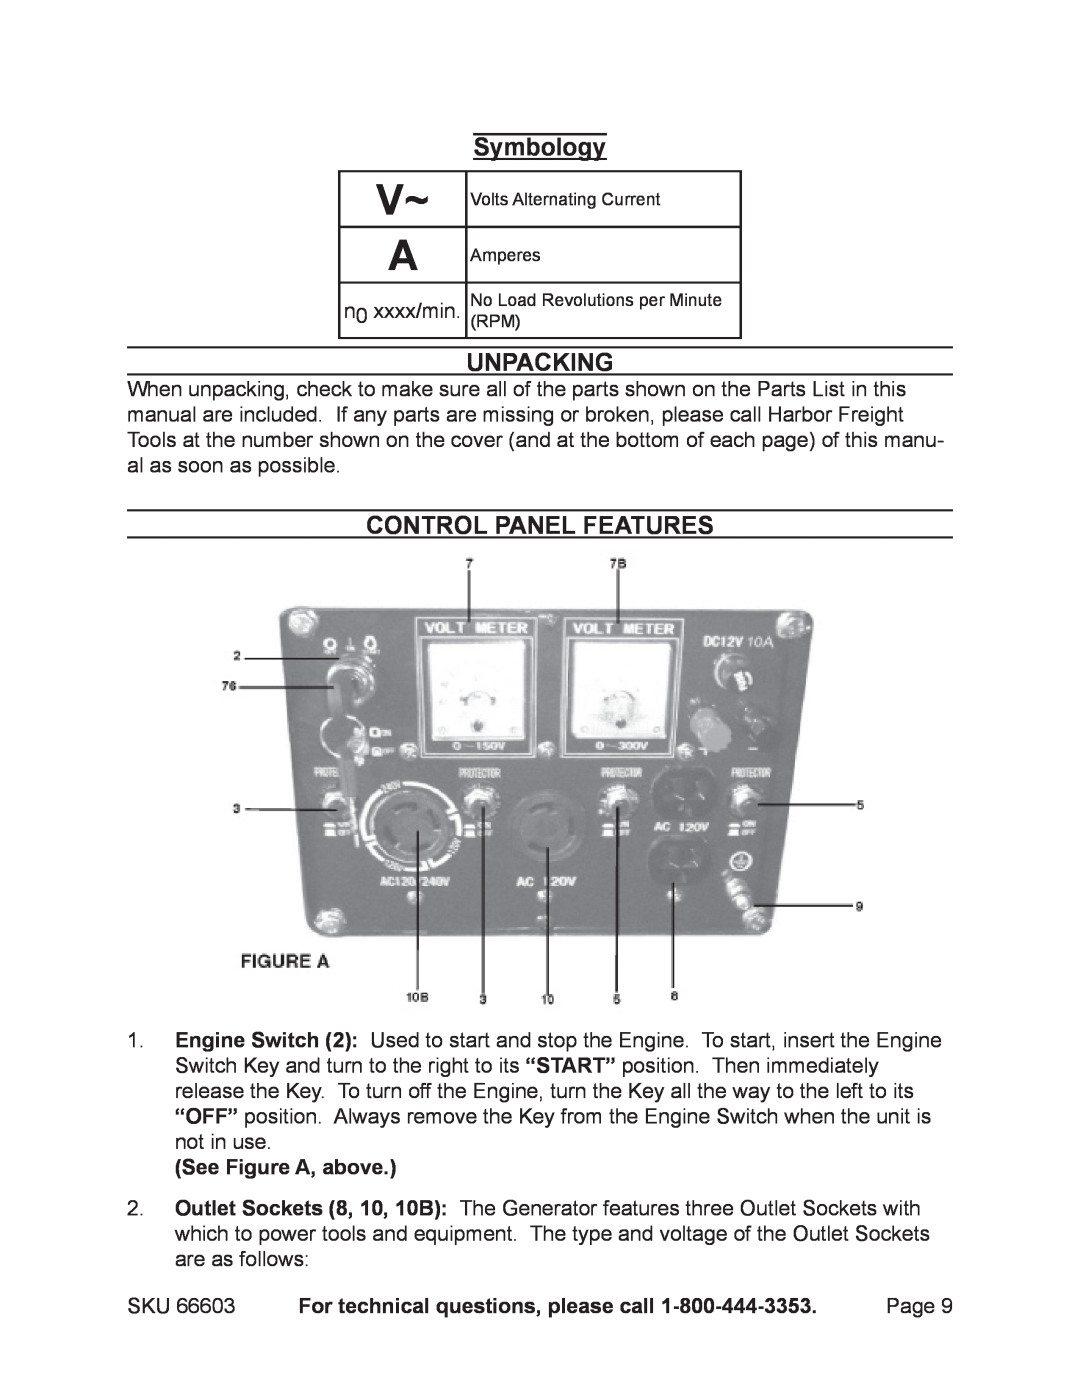 Chicago Electric 66603 manual Unpacking, Control Panel Features, Symbology, See Figure A, above 